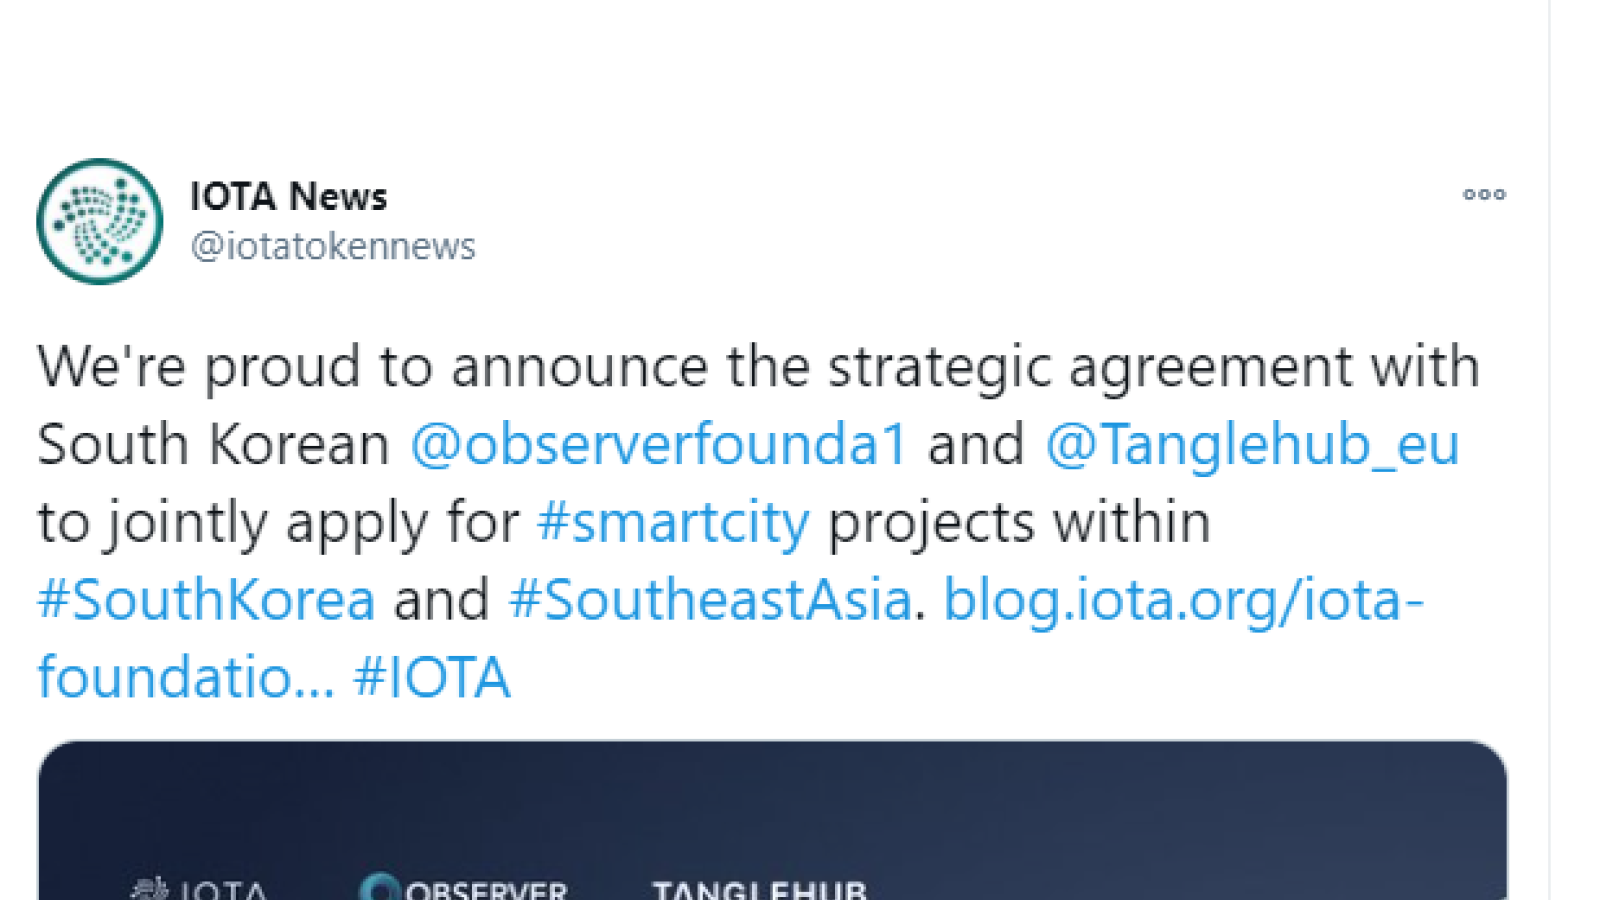 IOTA inks a partnership to advance IoT and smart cities in South Korea